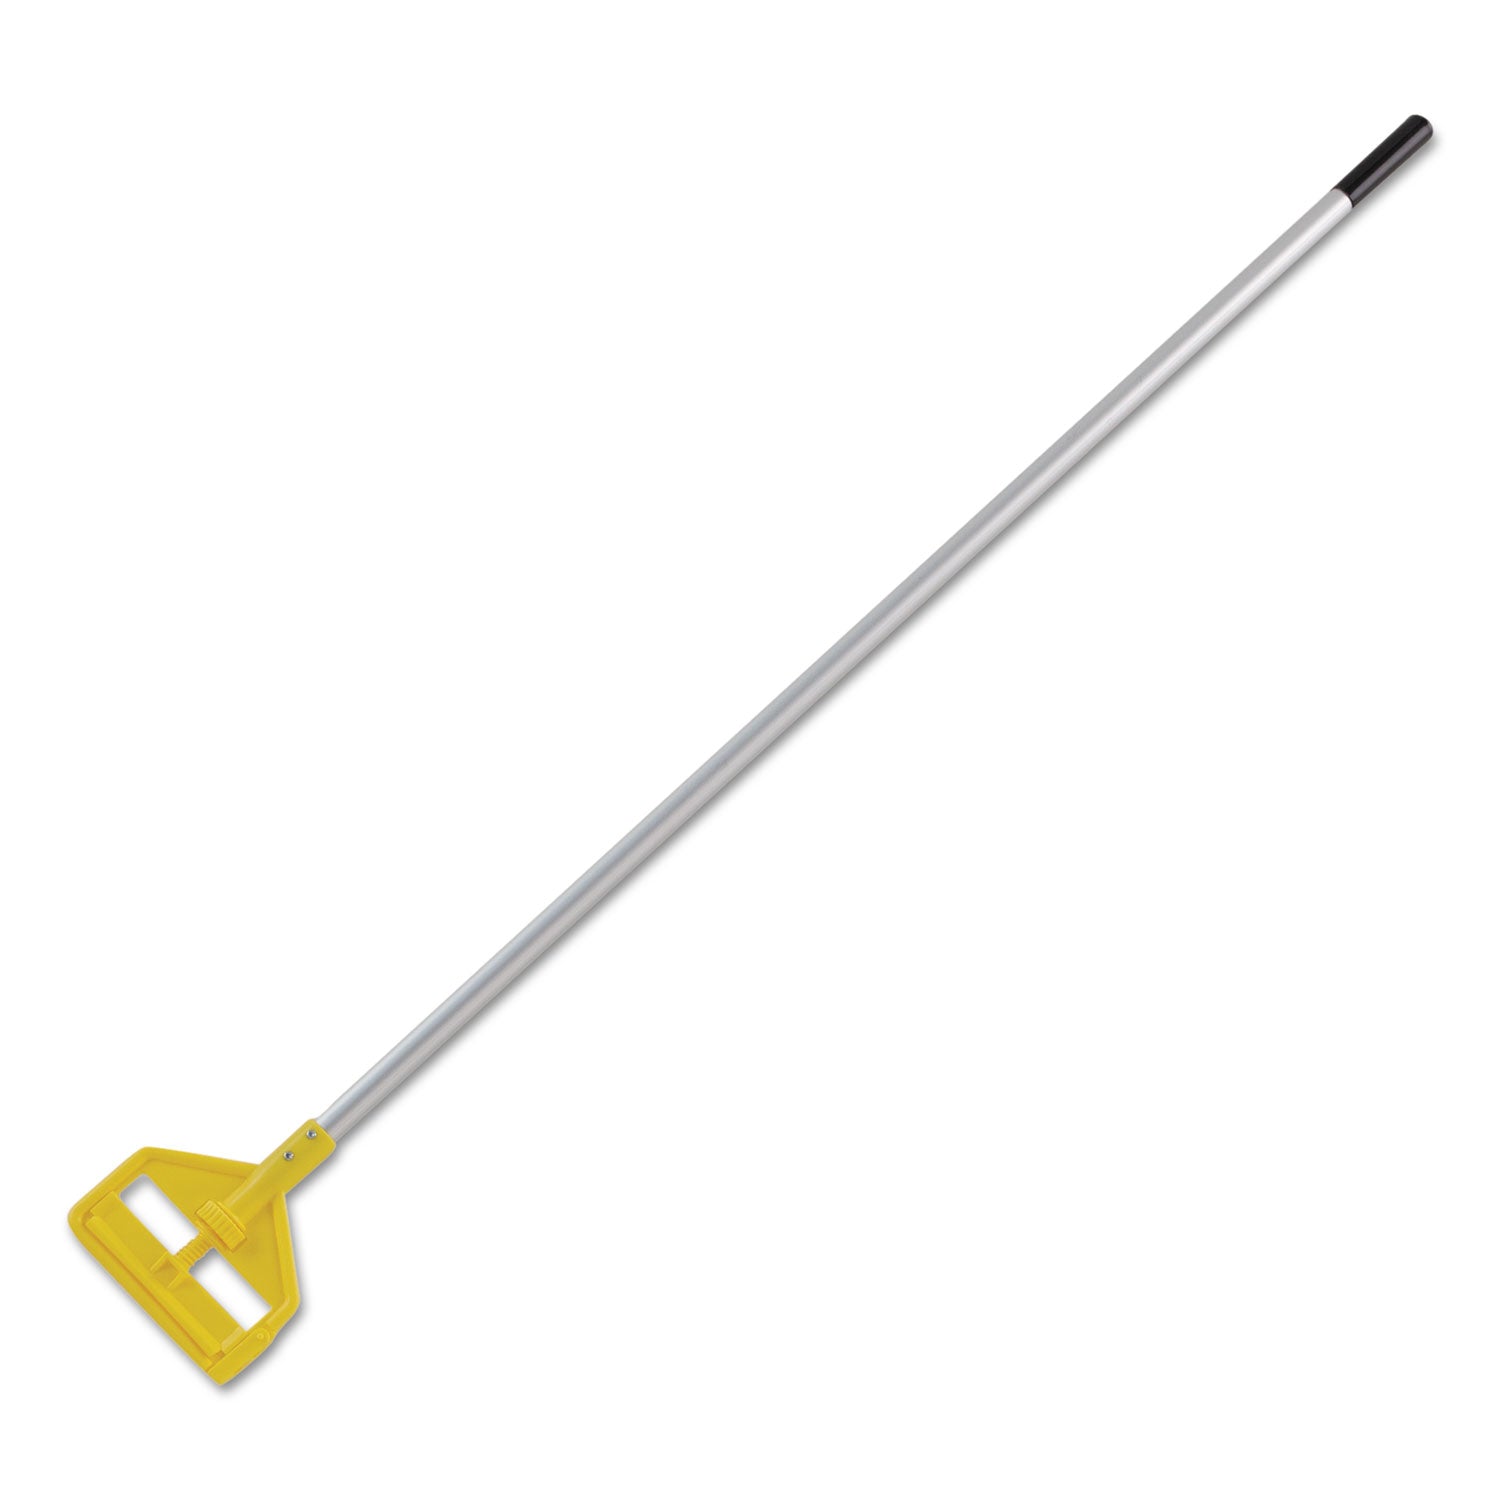 Invader Aluminum Side-Gate Wet-Mop Handle, 60", Gray/Yellow - 